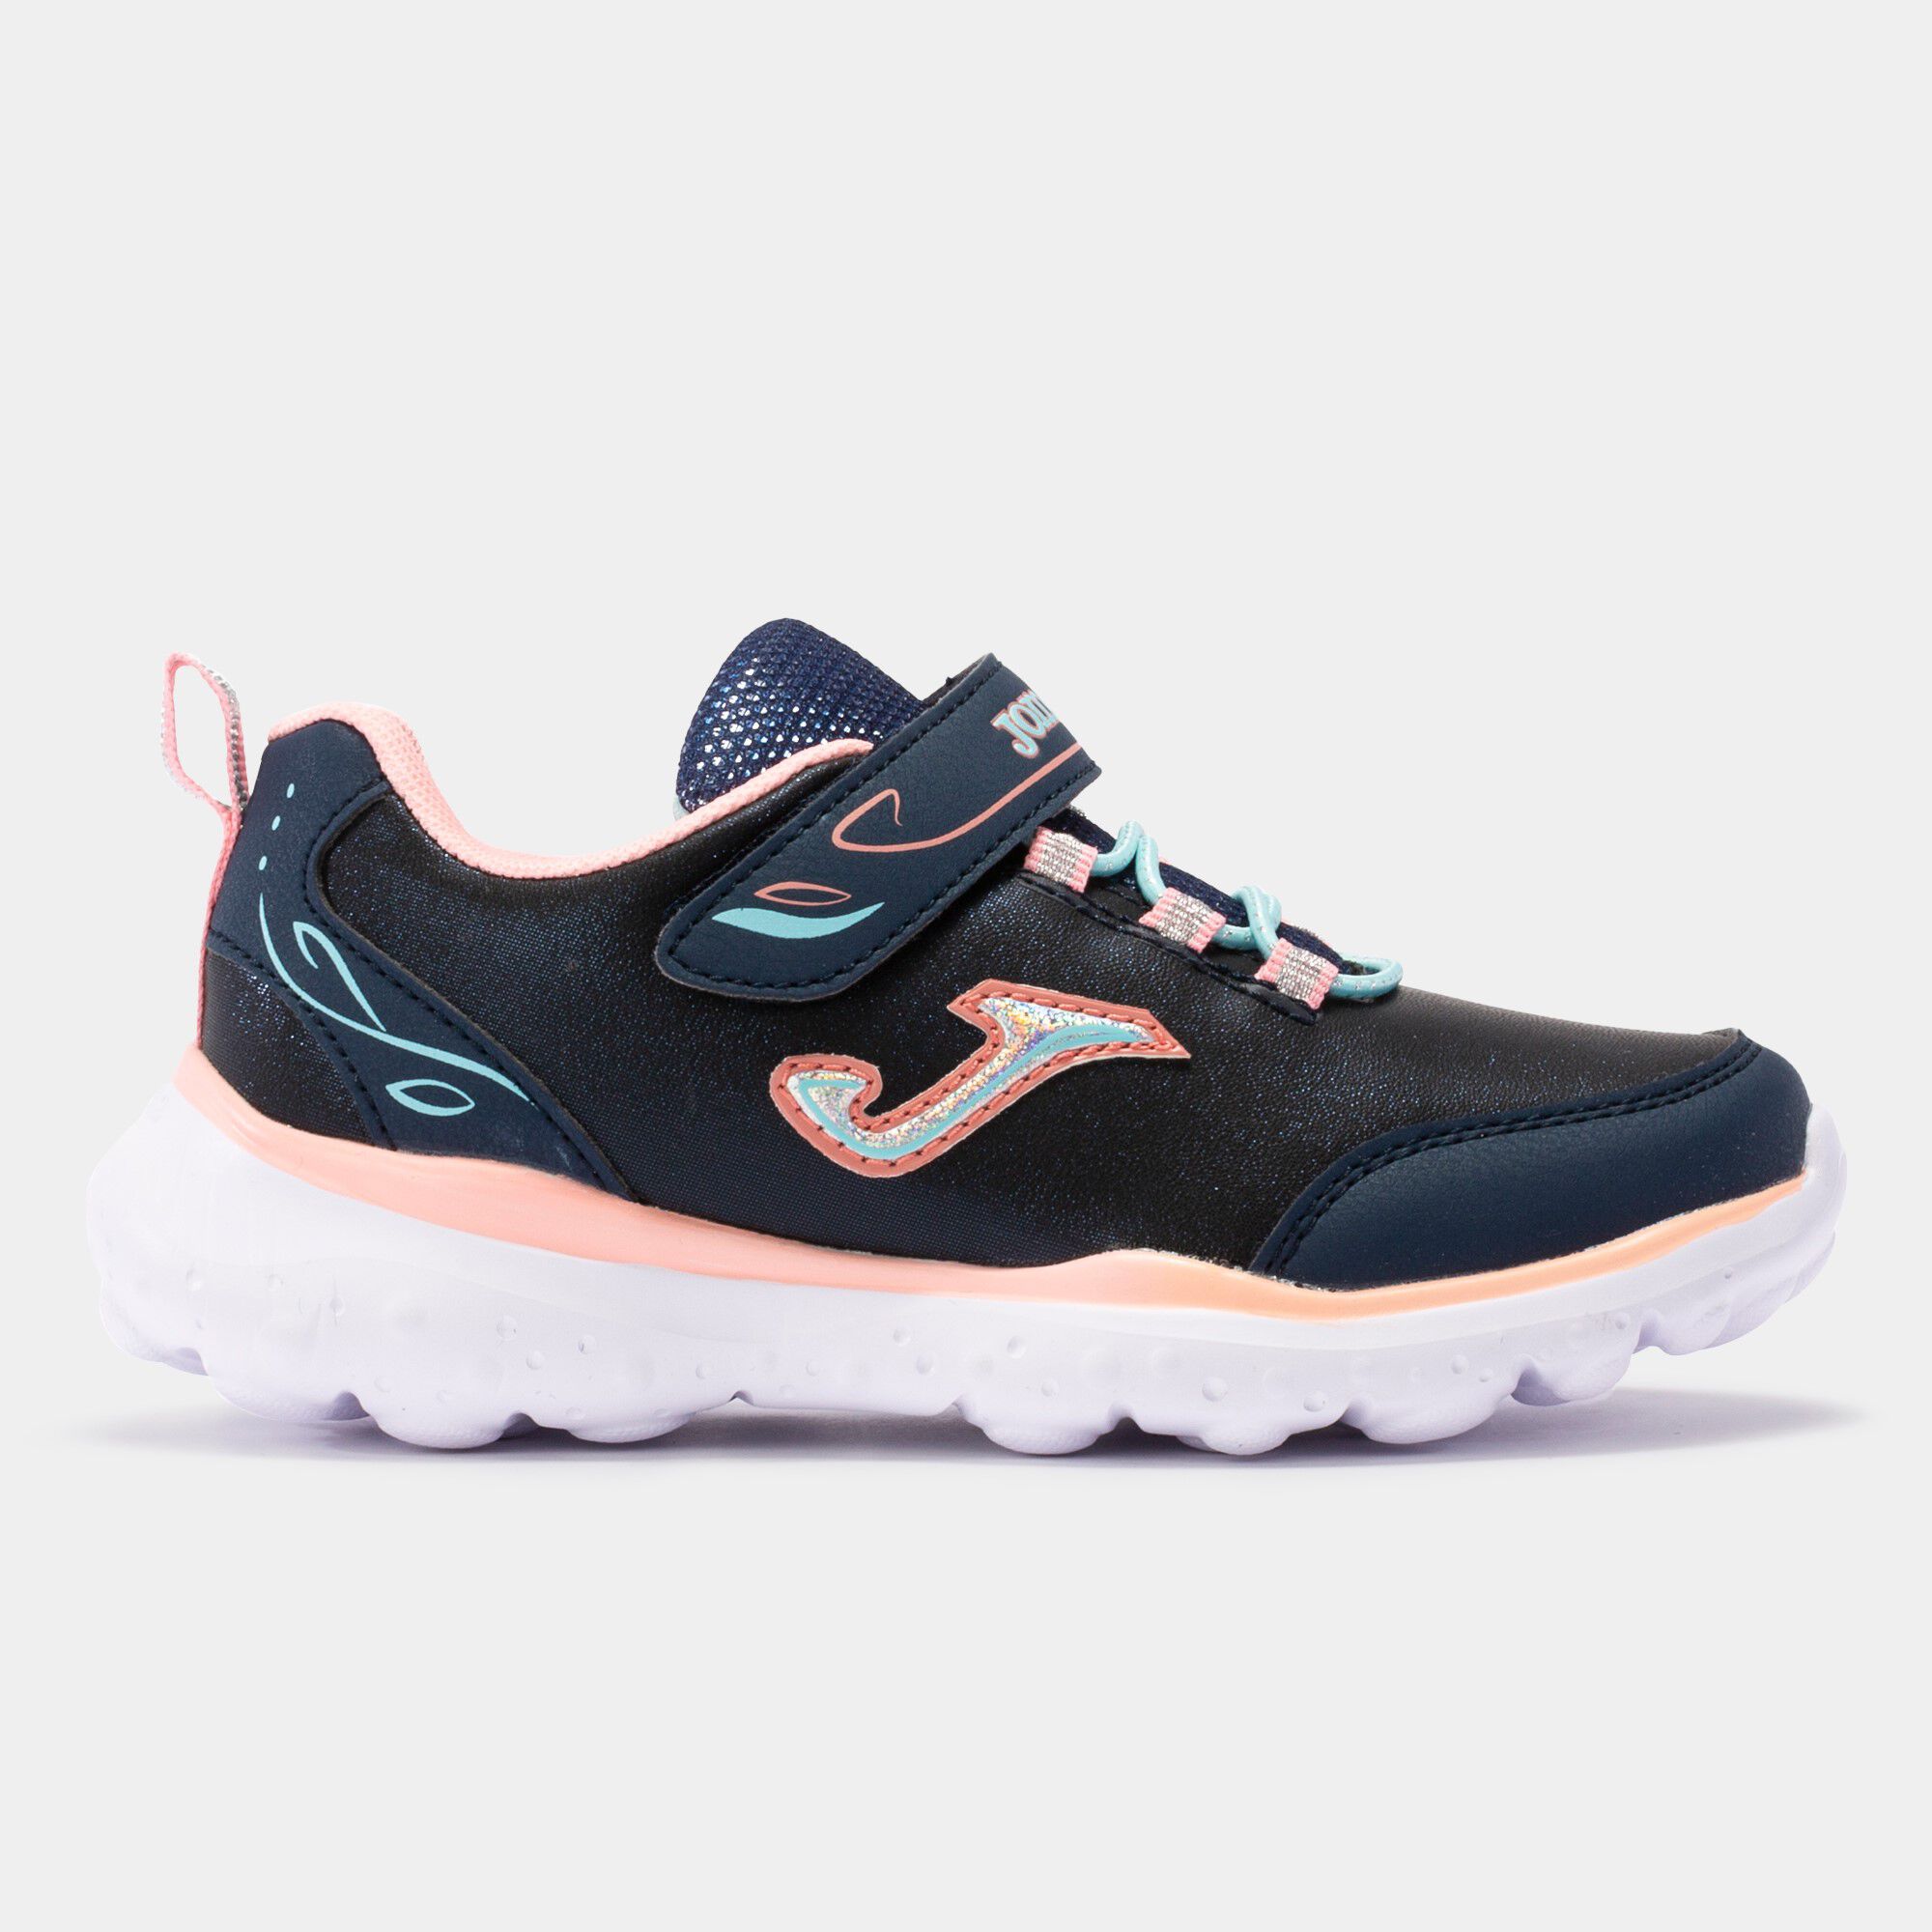 CASUAL SHOES BUTTERFLY 22 JUNIOR NAVY BLUE PINK